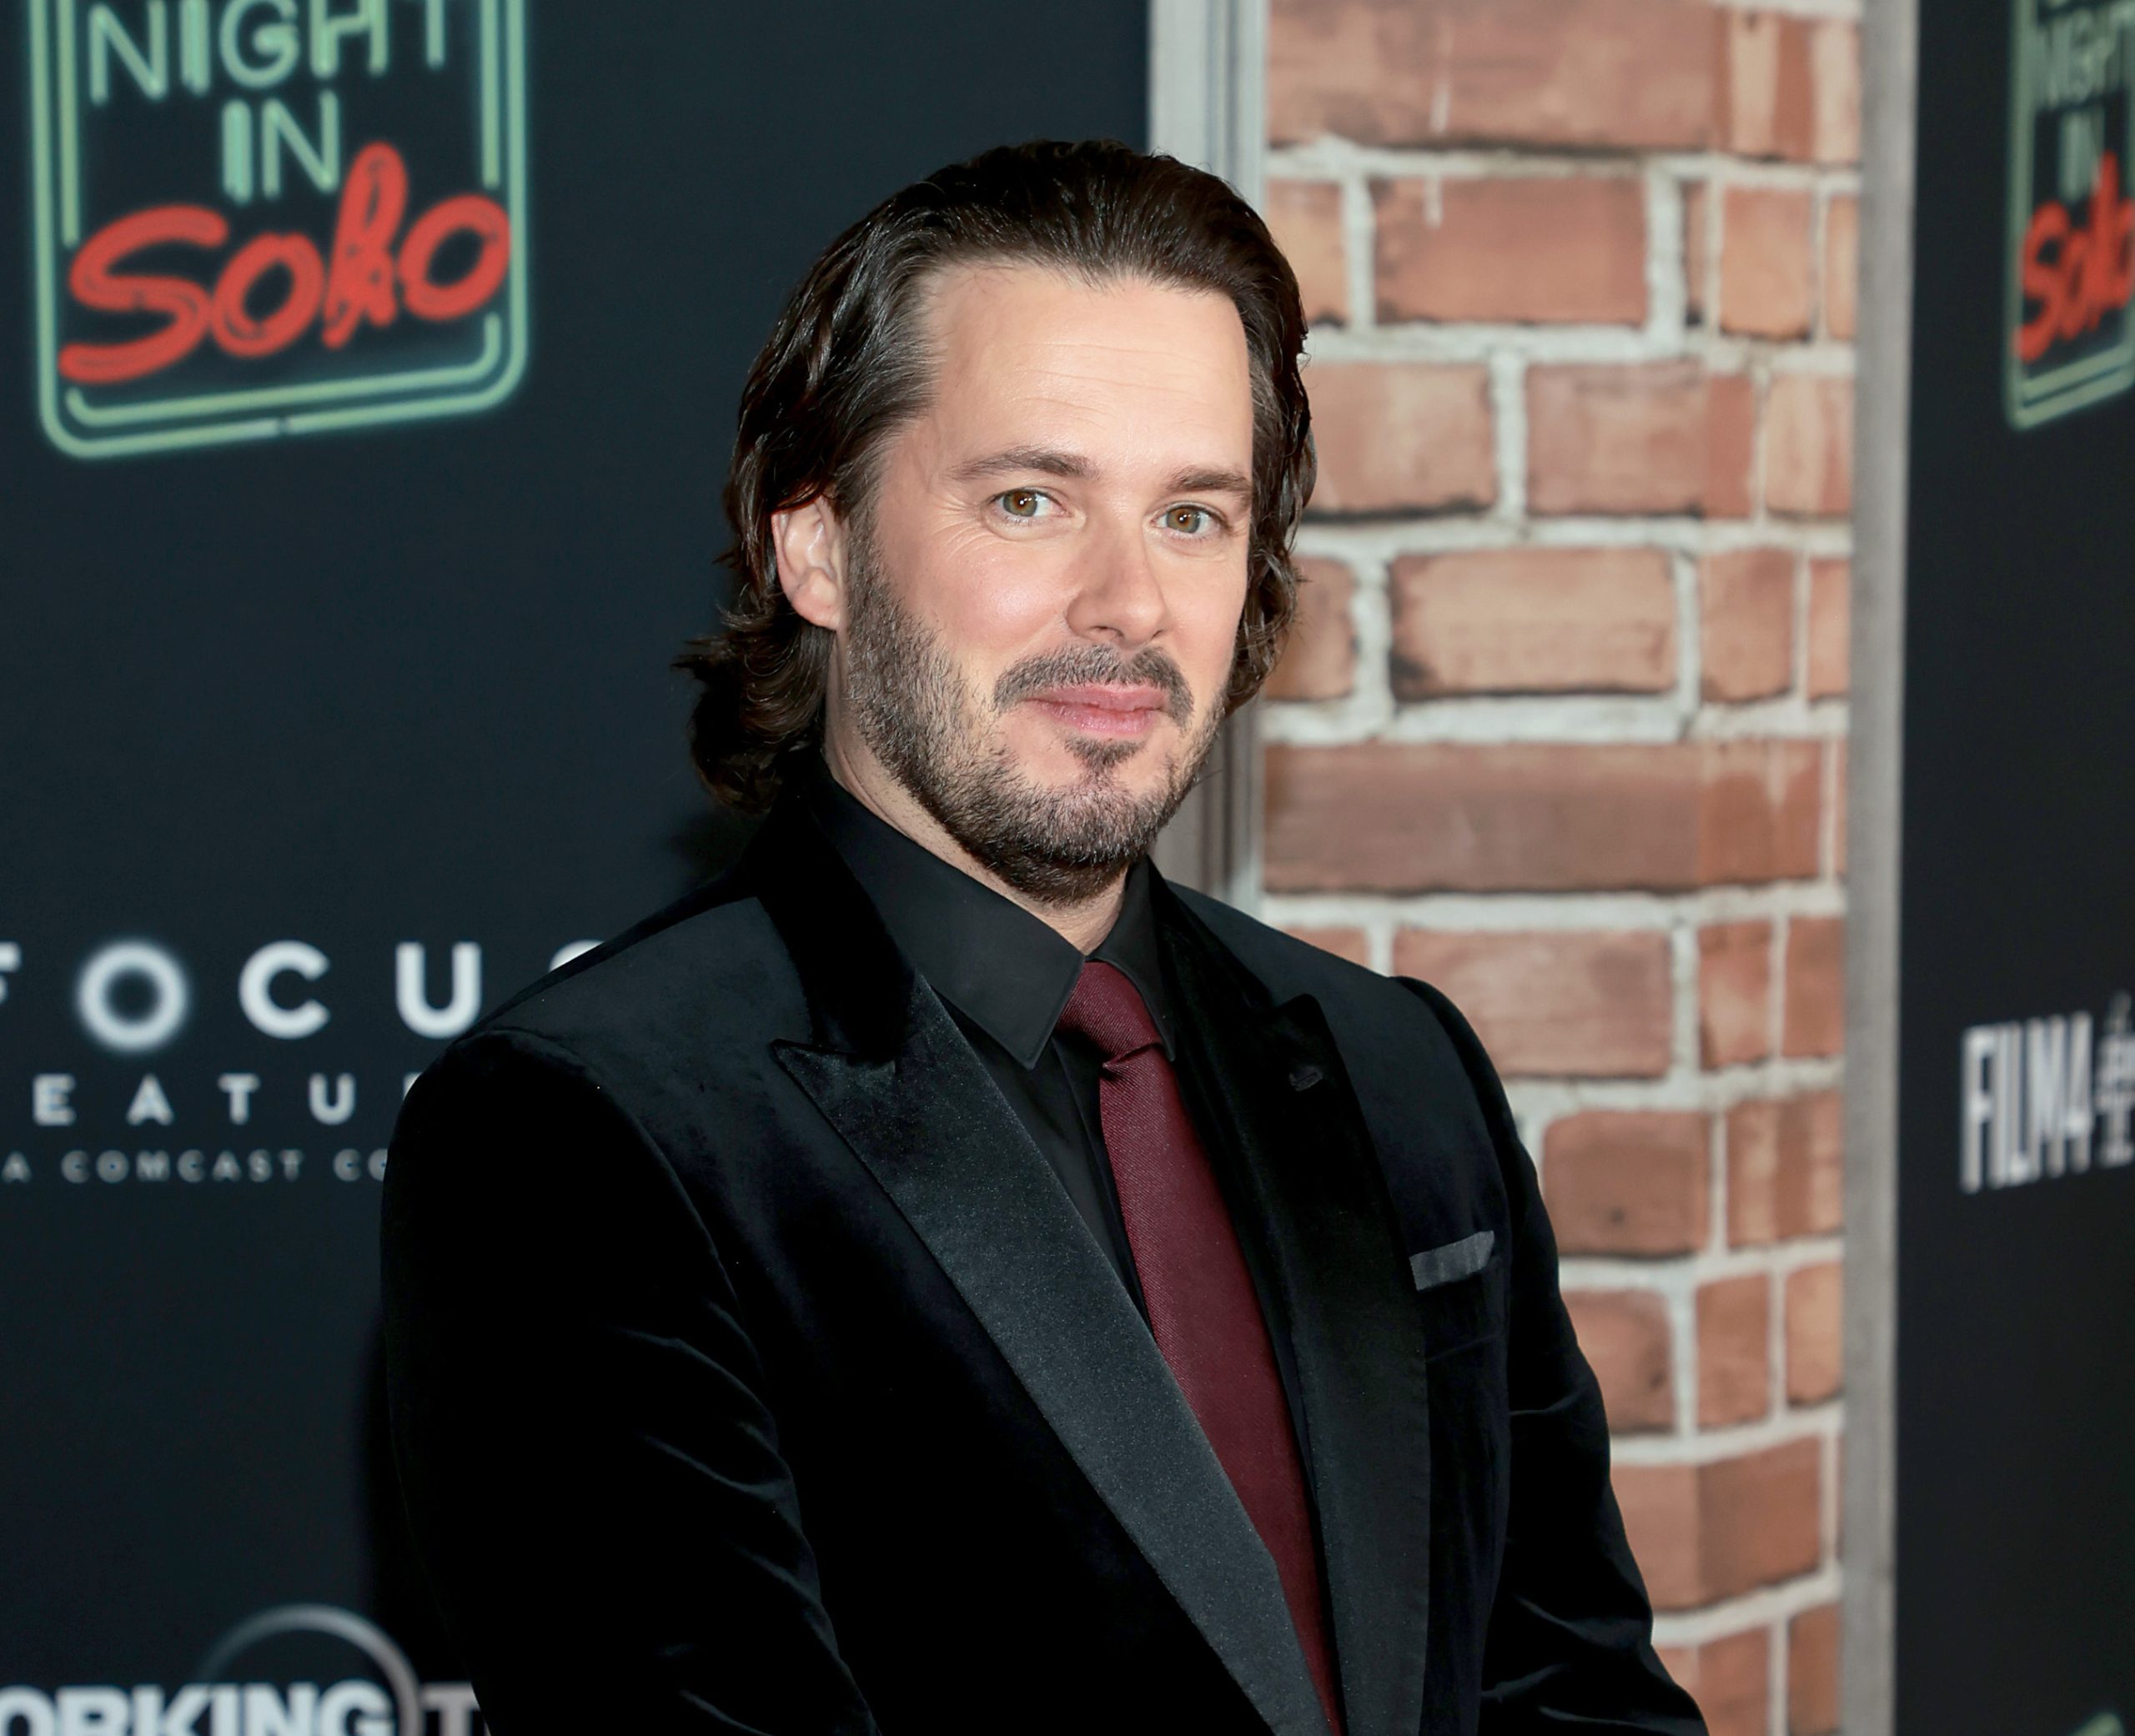 Edgar Wright Wishes Some Franchises Would ‘Take a Breather,’ New Studio Execs Shouldn’t Be the ‘Janitor for All the IP’